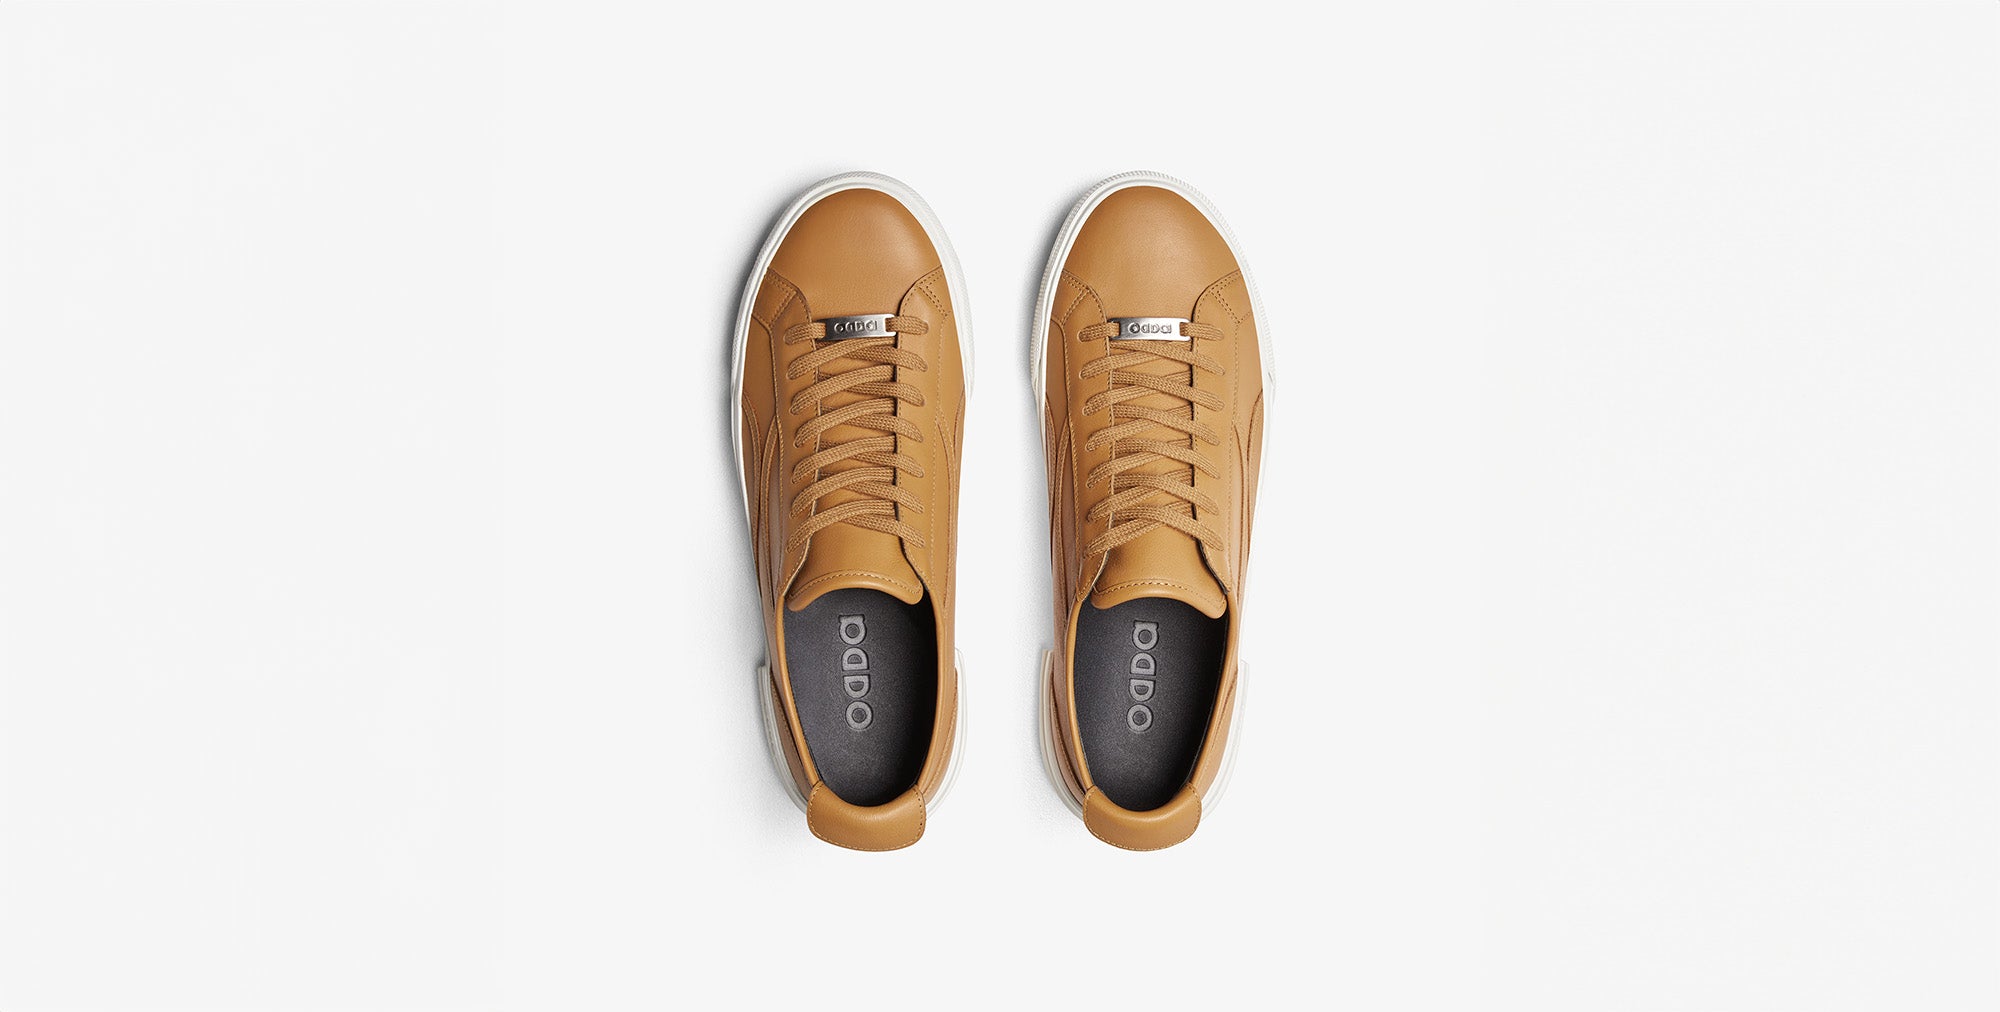 Untitled 3 leather sneakers: A timeless legacy of style